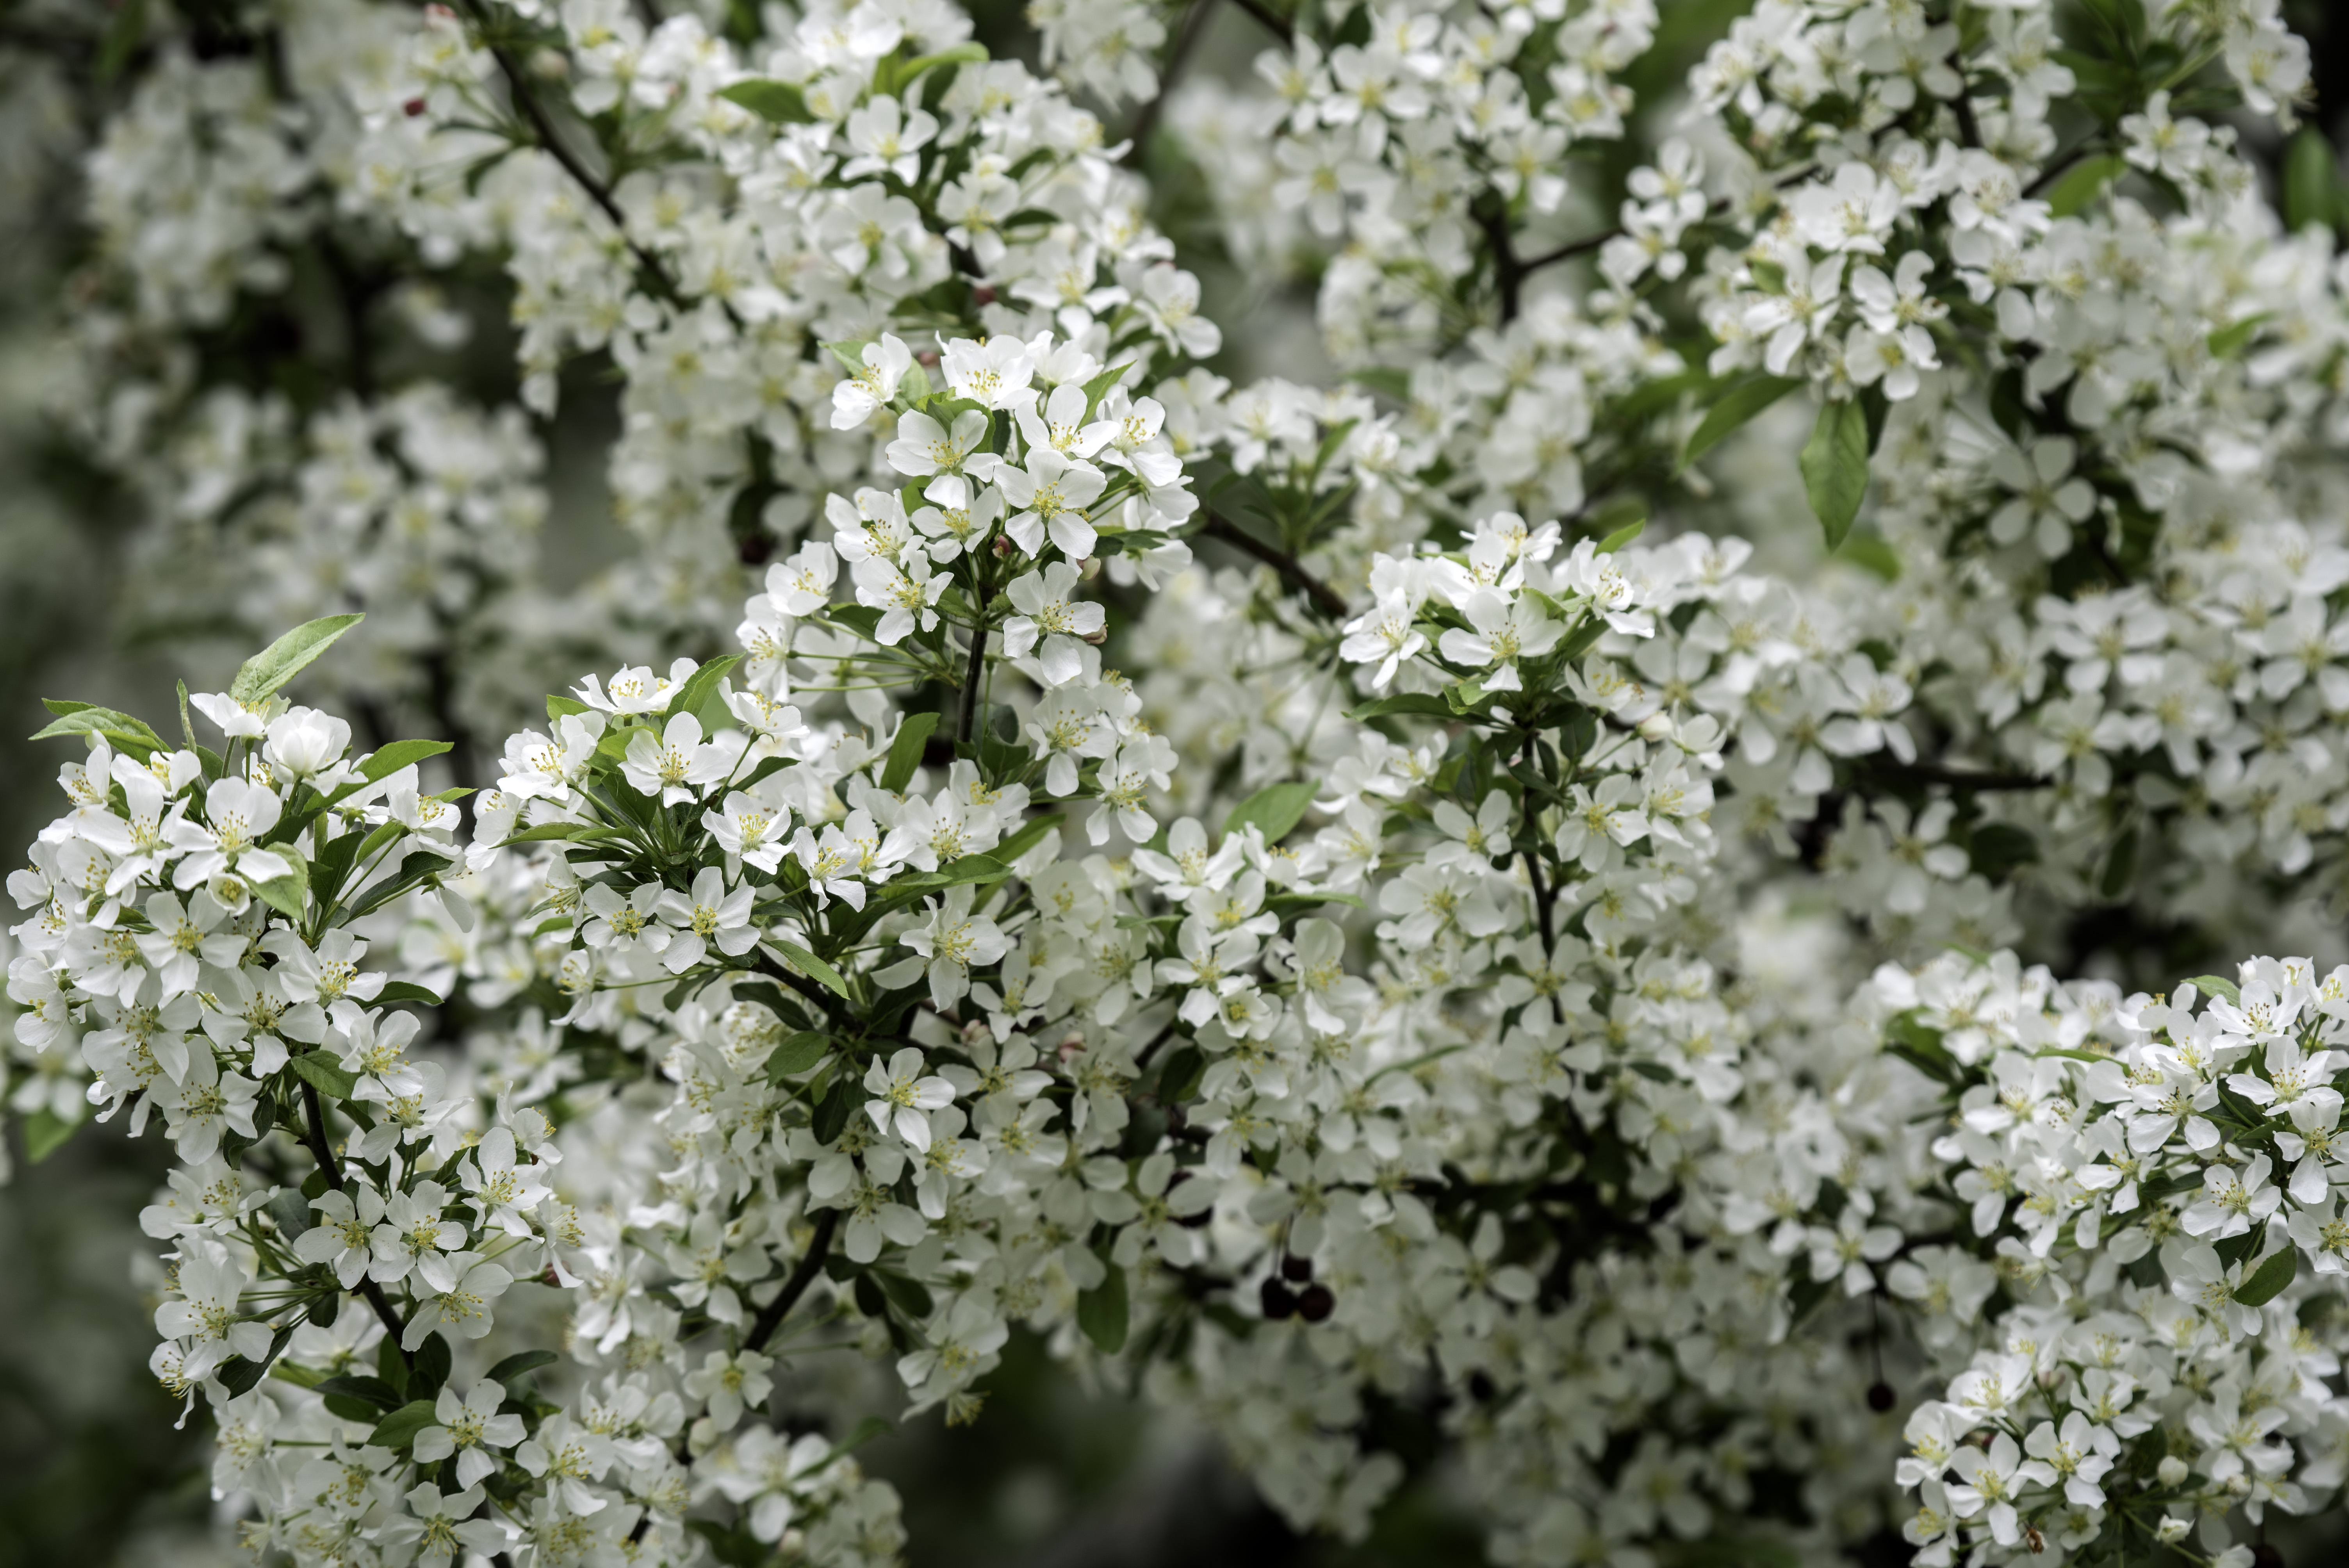 White flowers on branches image - Free stock photo - Public Domain ...